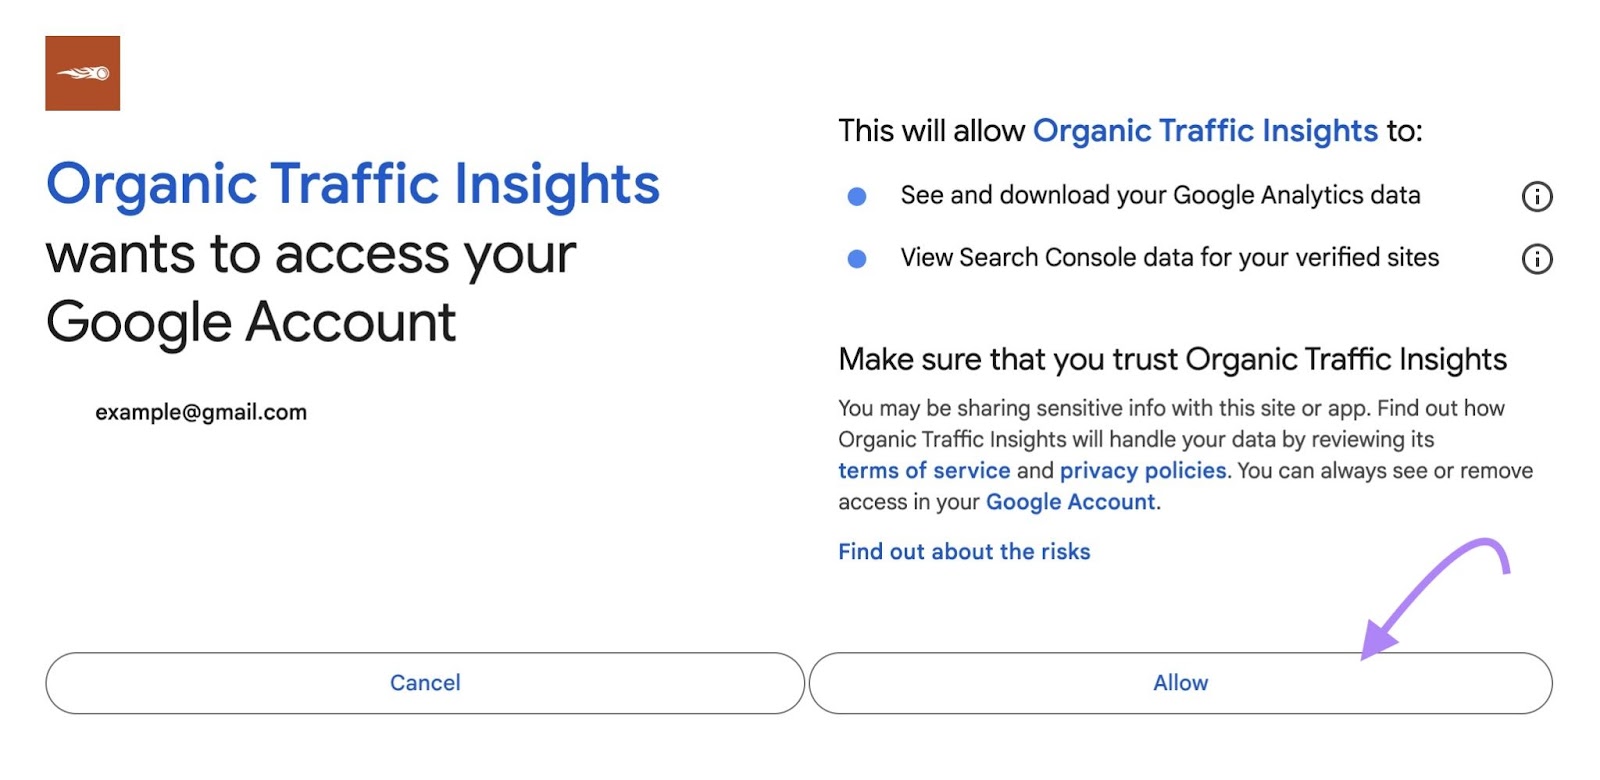 Organic traffic insights data permission screen requesting access to view your GA and GSC data with the 'Allow' button clicked.